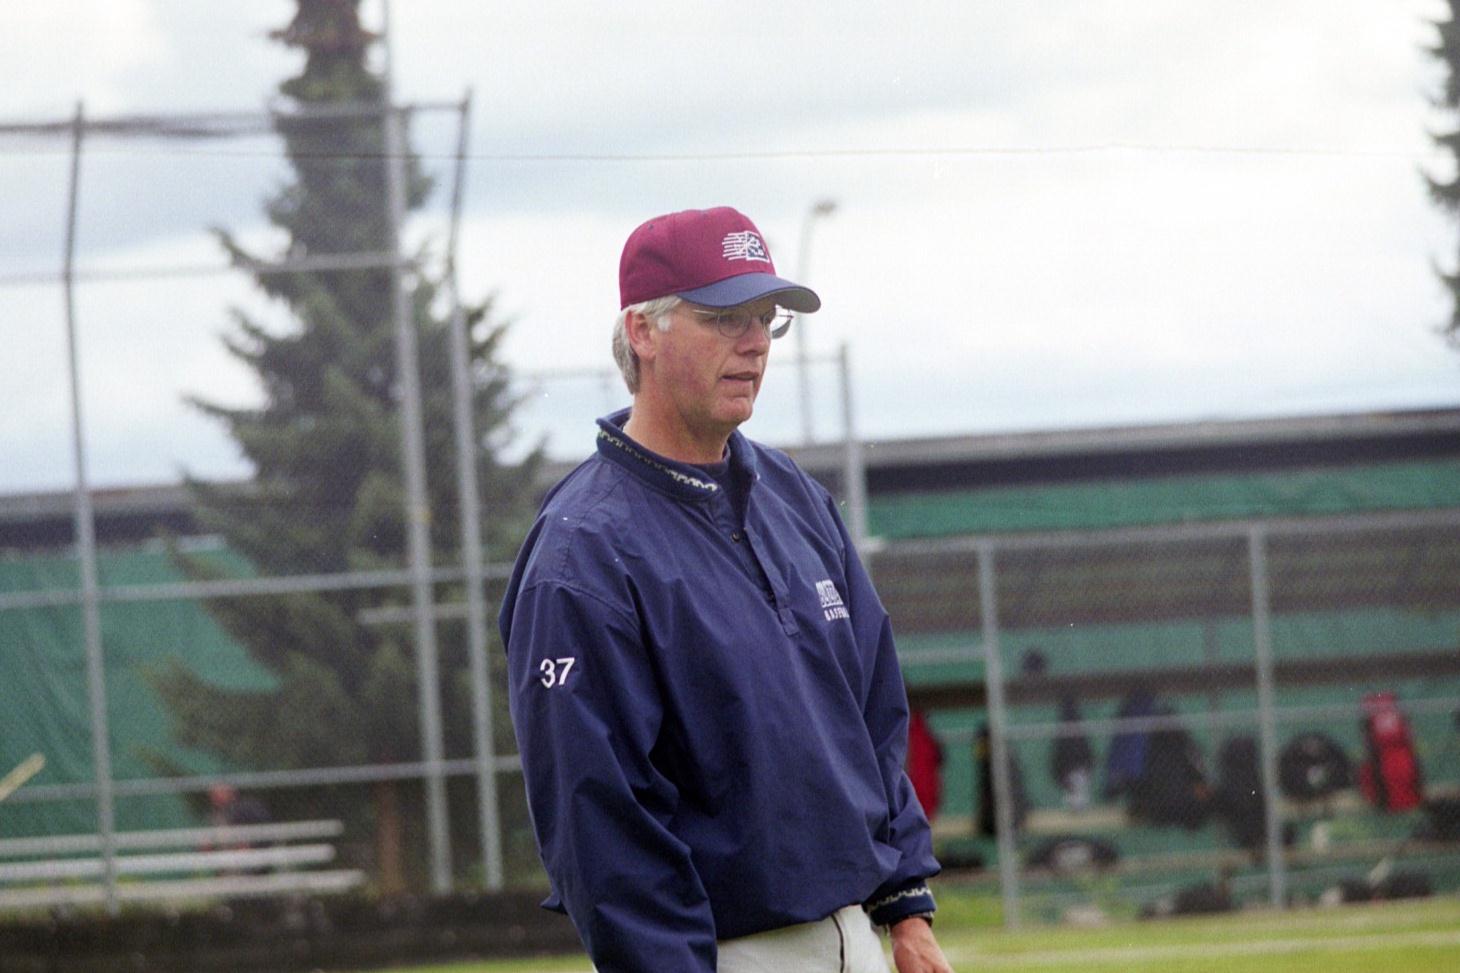 FORMER BLIZZARD PITCHING COACH 